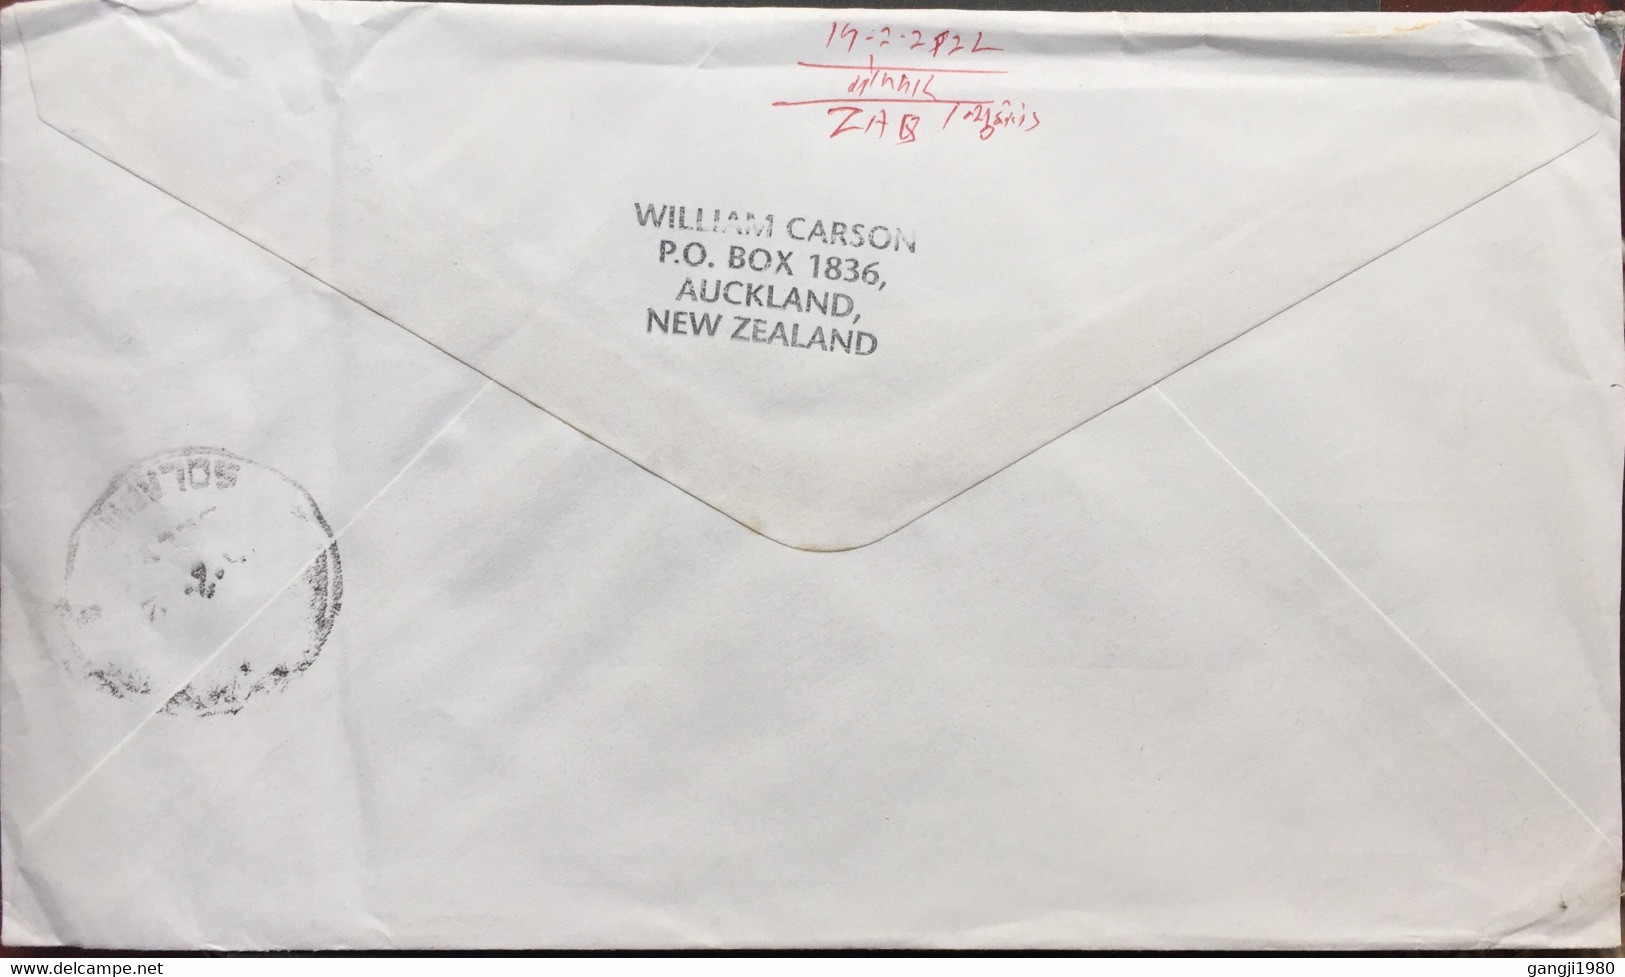 NEW ZEALAND 2022, USED AIRMAIL COVER TO INDIA, 2 STAMPS CHRISTMAS, NETSON LAKES ,TASMAN ,WATER,NATURE,CHILD , - Brieven En Documenten